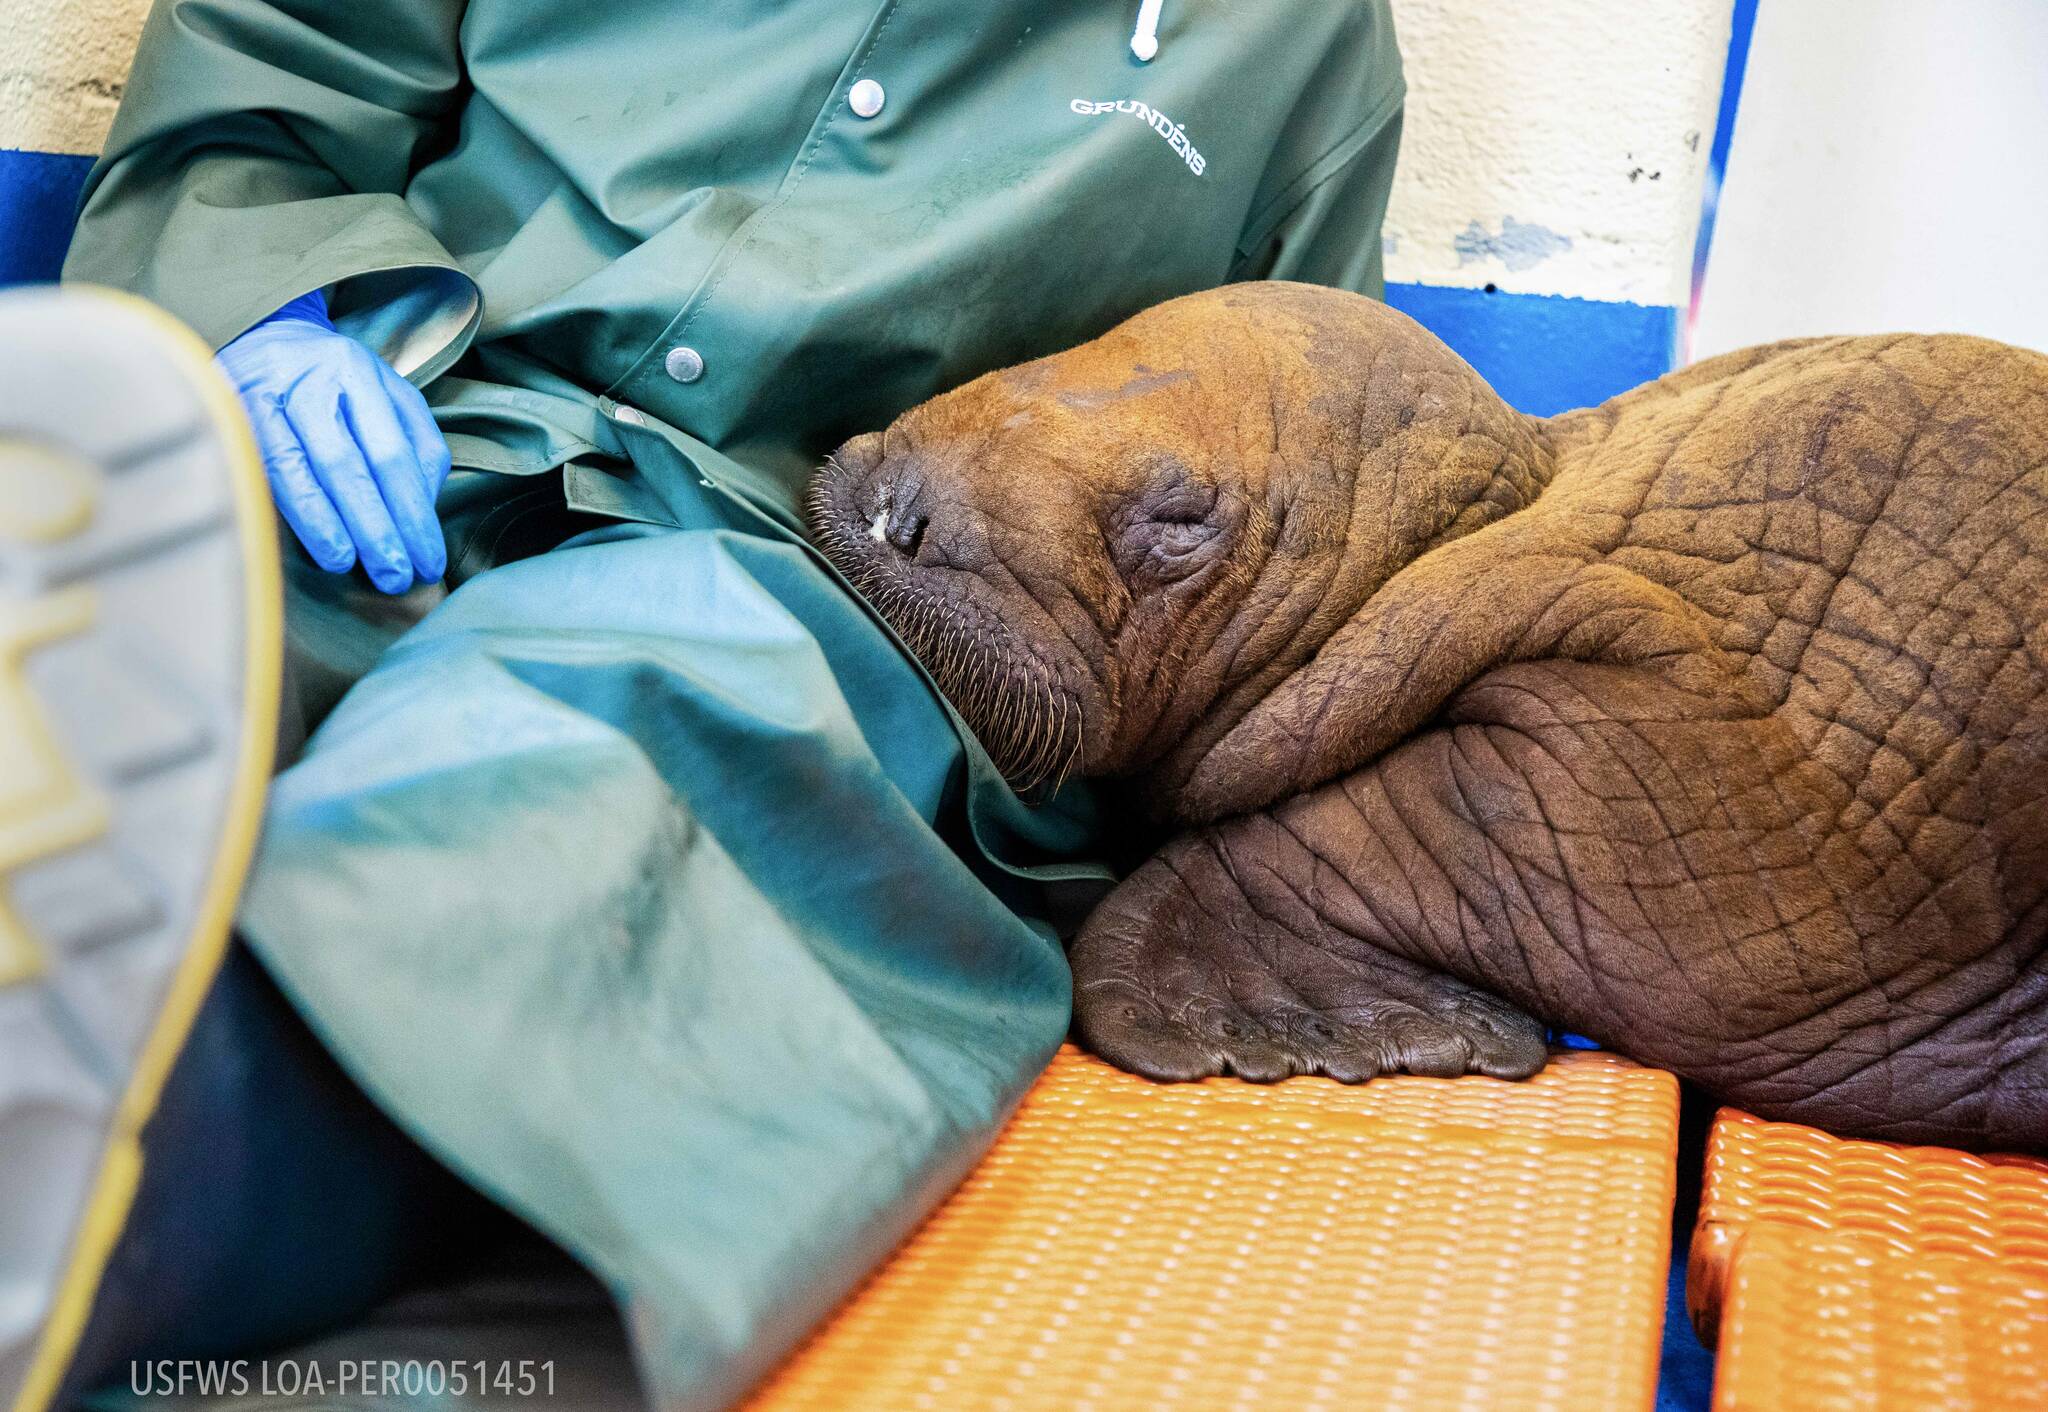 A Pacific walrus pup rests his head on the lap of an Alaska SeaLife Center staff member after being admitted to the Alaska SeaLife Center Wildlife Response Program on Aug. 1, 2023. Walruses are highly tactile and social animals, receiving near-constant care from their mothers during the first two years of life. To emulate this maternal closeness, round-the-clock “cuddling” is being provided to ensure the calf remains calm and develops in a healthy manner. (Photo courtesy Kaiti Grant/Alaska SeaLife Center)